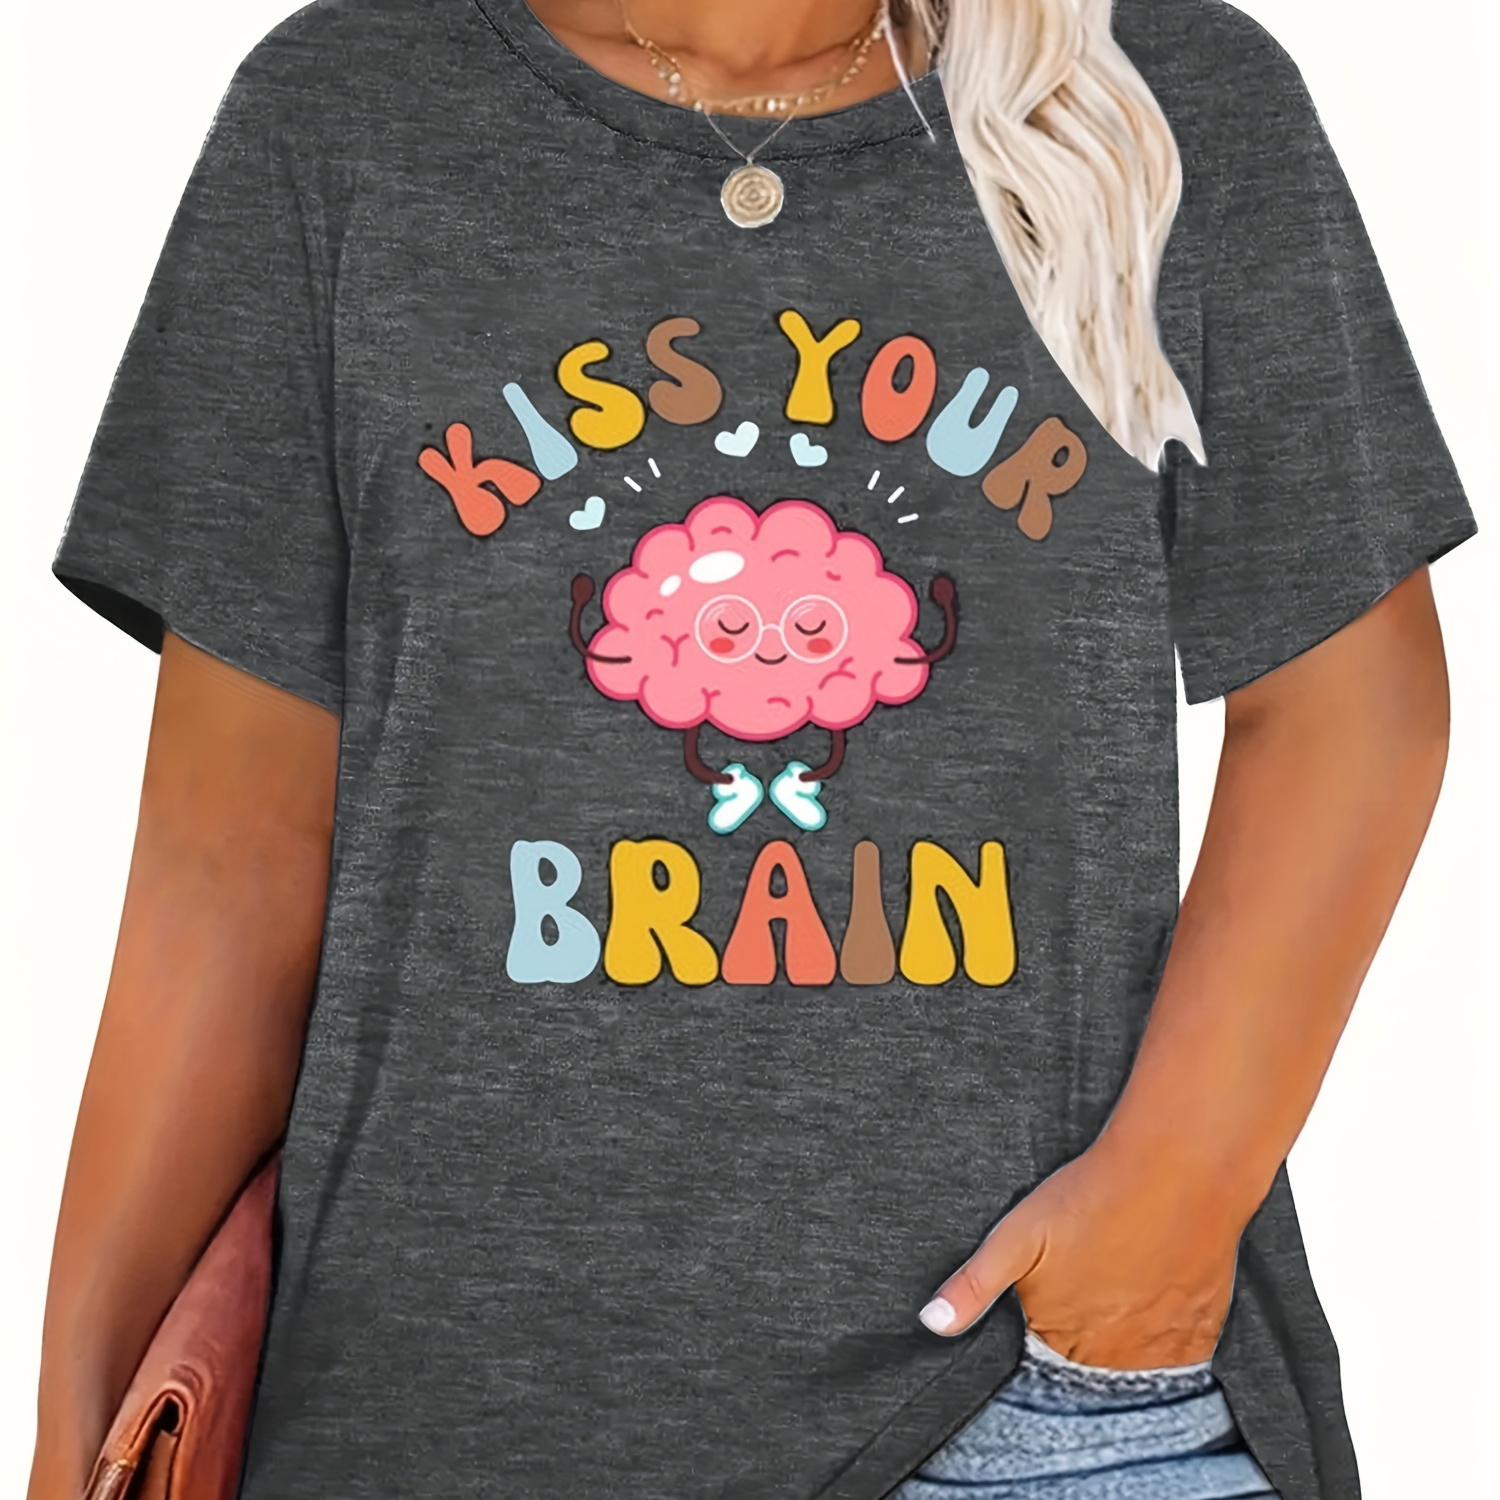 

Plus Size Cartoon Brain Print T-shirt, Casual Short Sleeve Top For Spring & Summer, Women's Plus Size Clothing